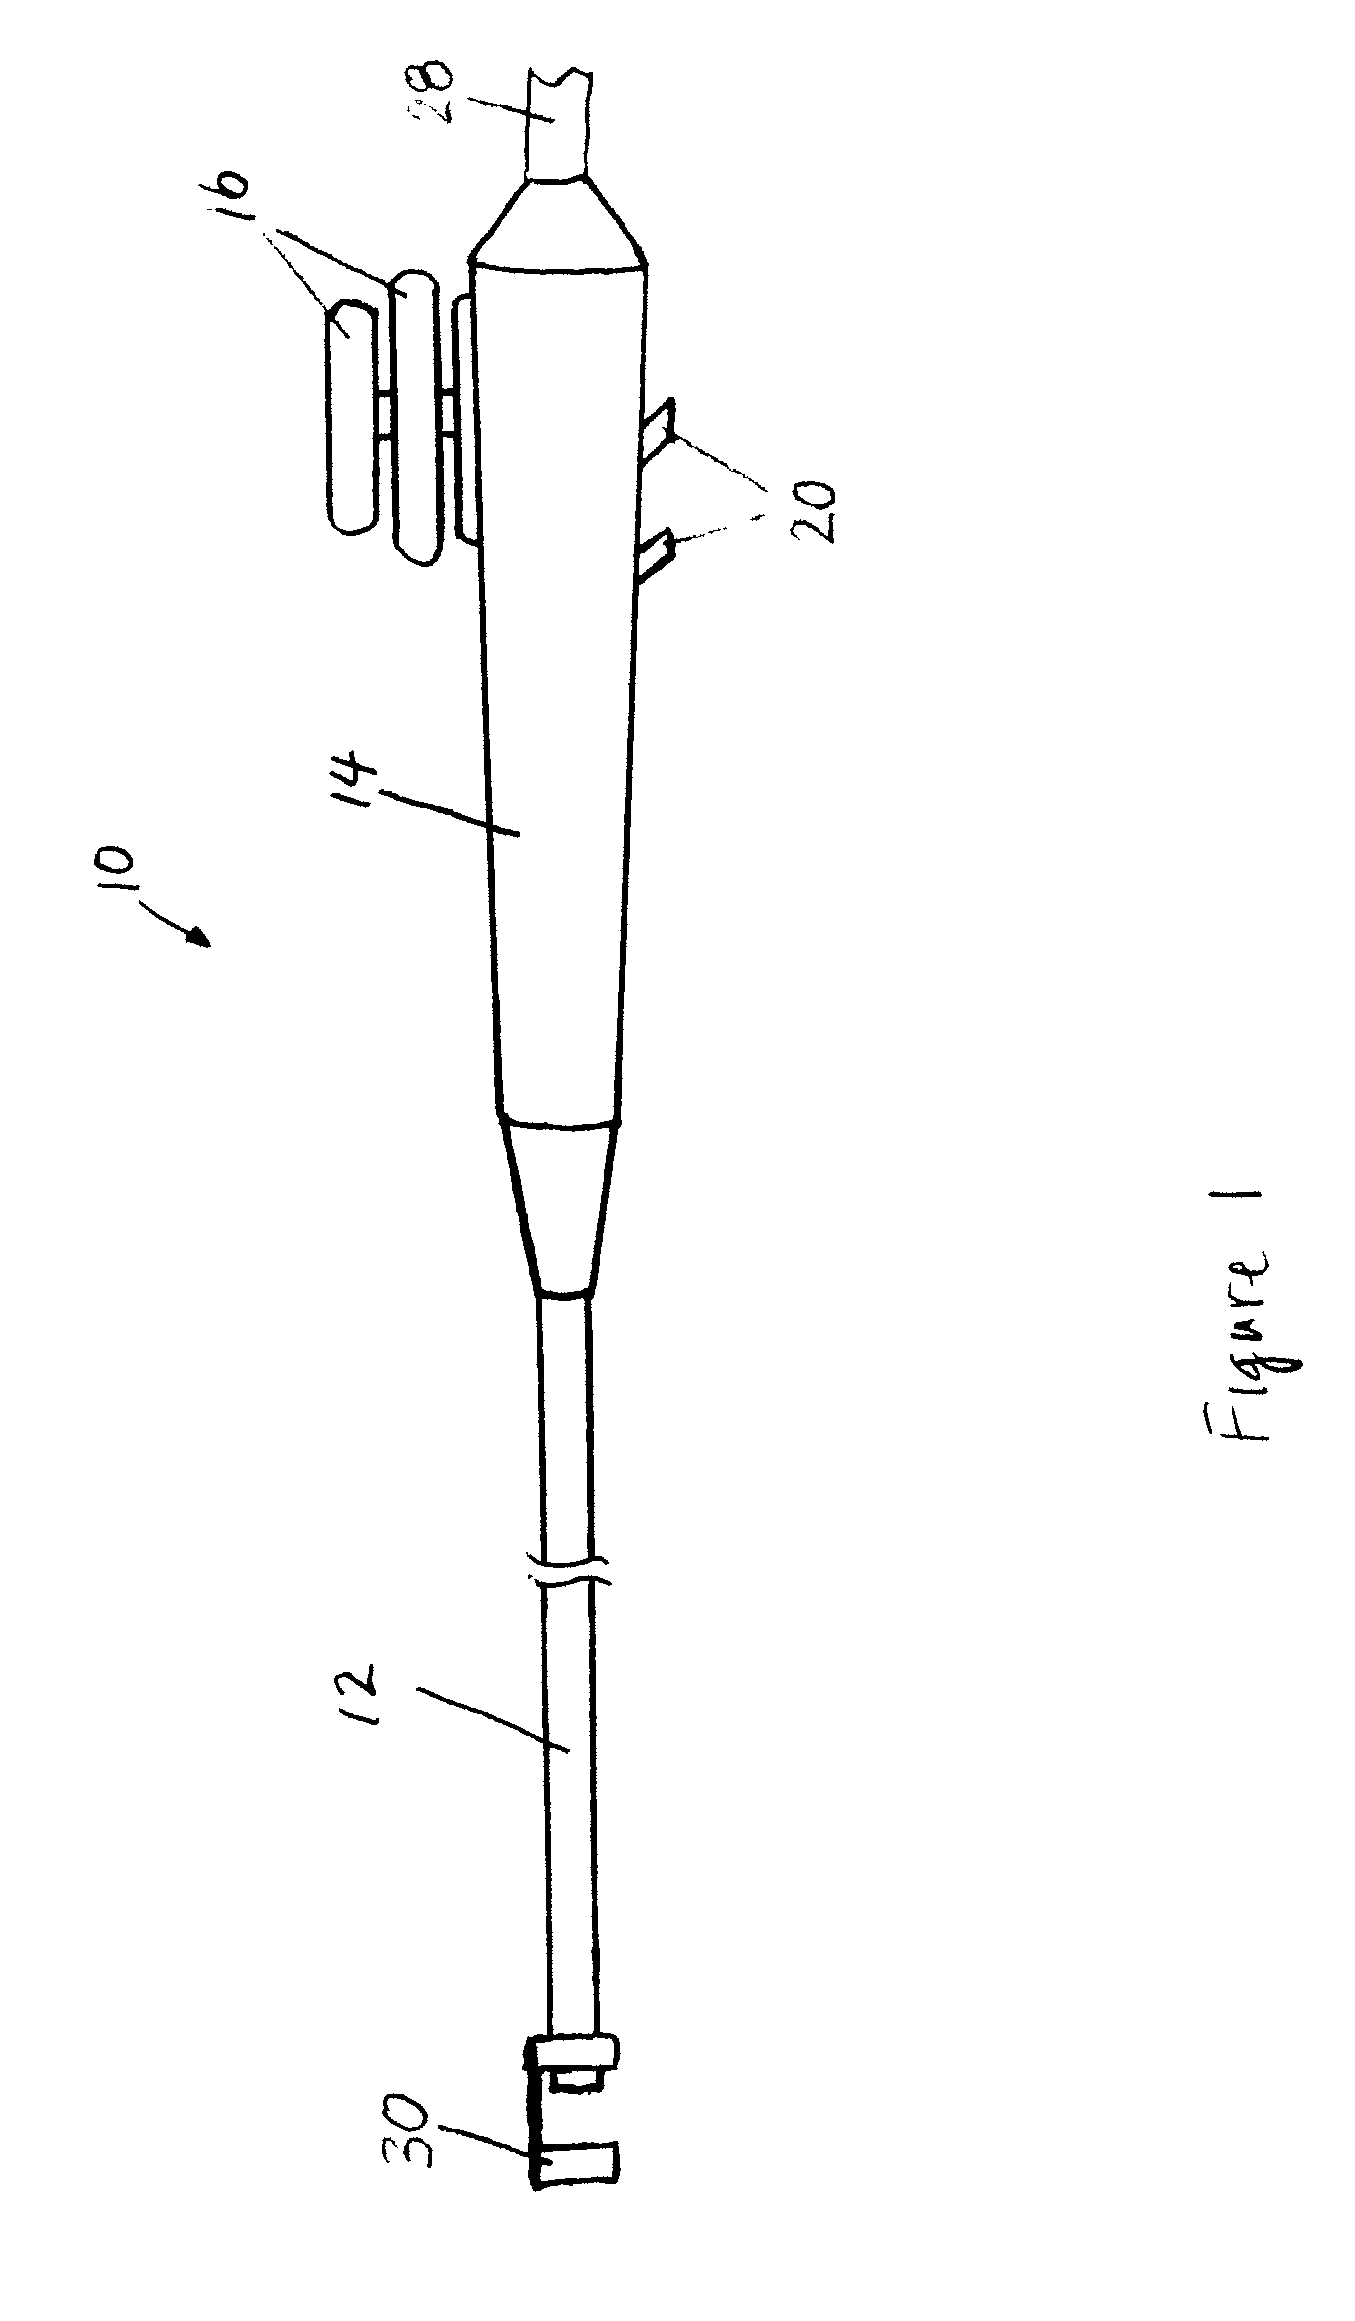 Endoscope having detachable imaging device and method of using